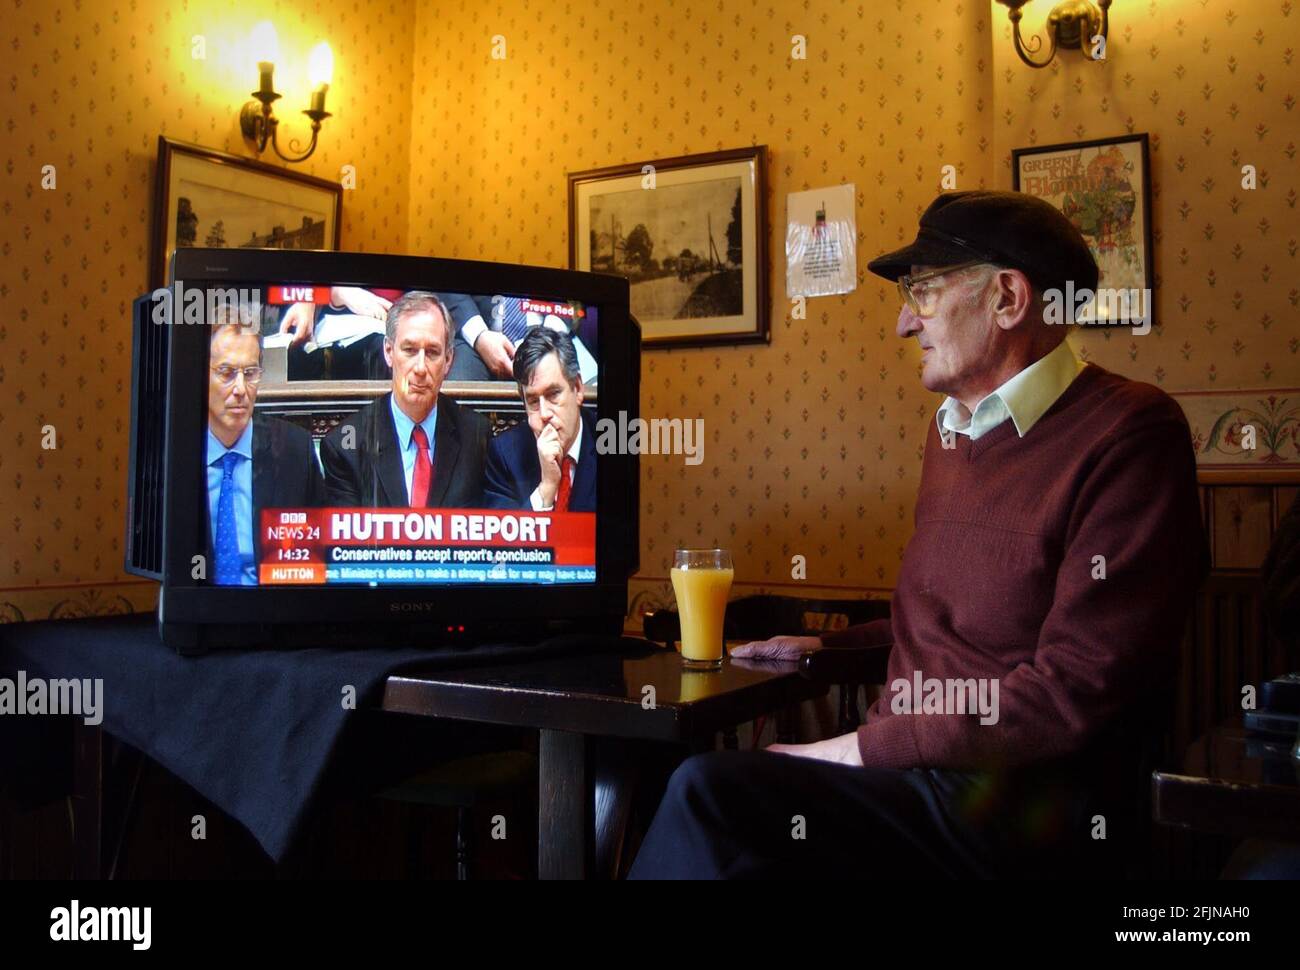 BRIAN WRIGHT,FRIEND  OF DAVID KELLY ,WATCH THE NEWS REPORTS IN HIS LOCAL PUB ON THE DAY OF THE HUTTON REPORT.28/1/04 PILSTON Stock Photo